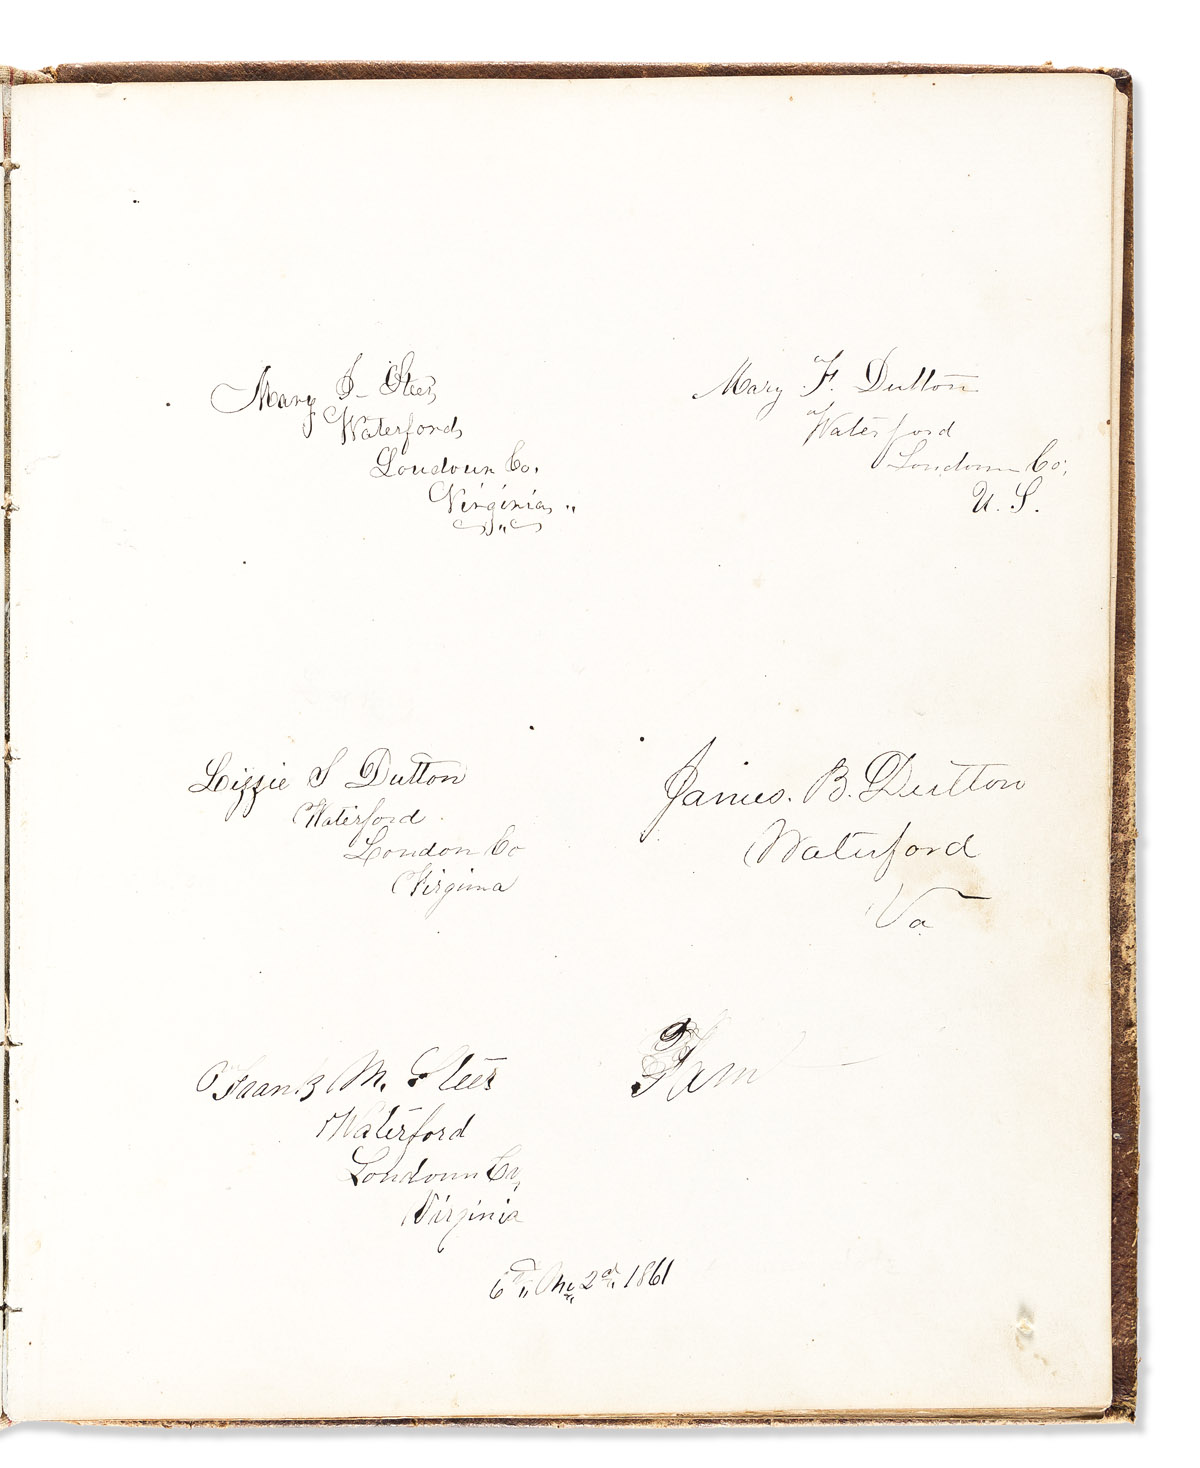 Dutton, Elizabeth Schooley (1839-1927) Two Autograph Books with her Signature and those of other Quakers from Waterford, Loudoun County